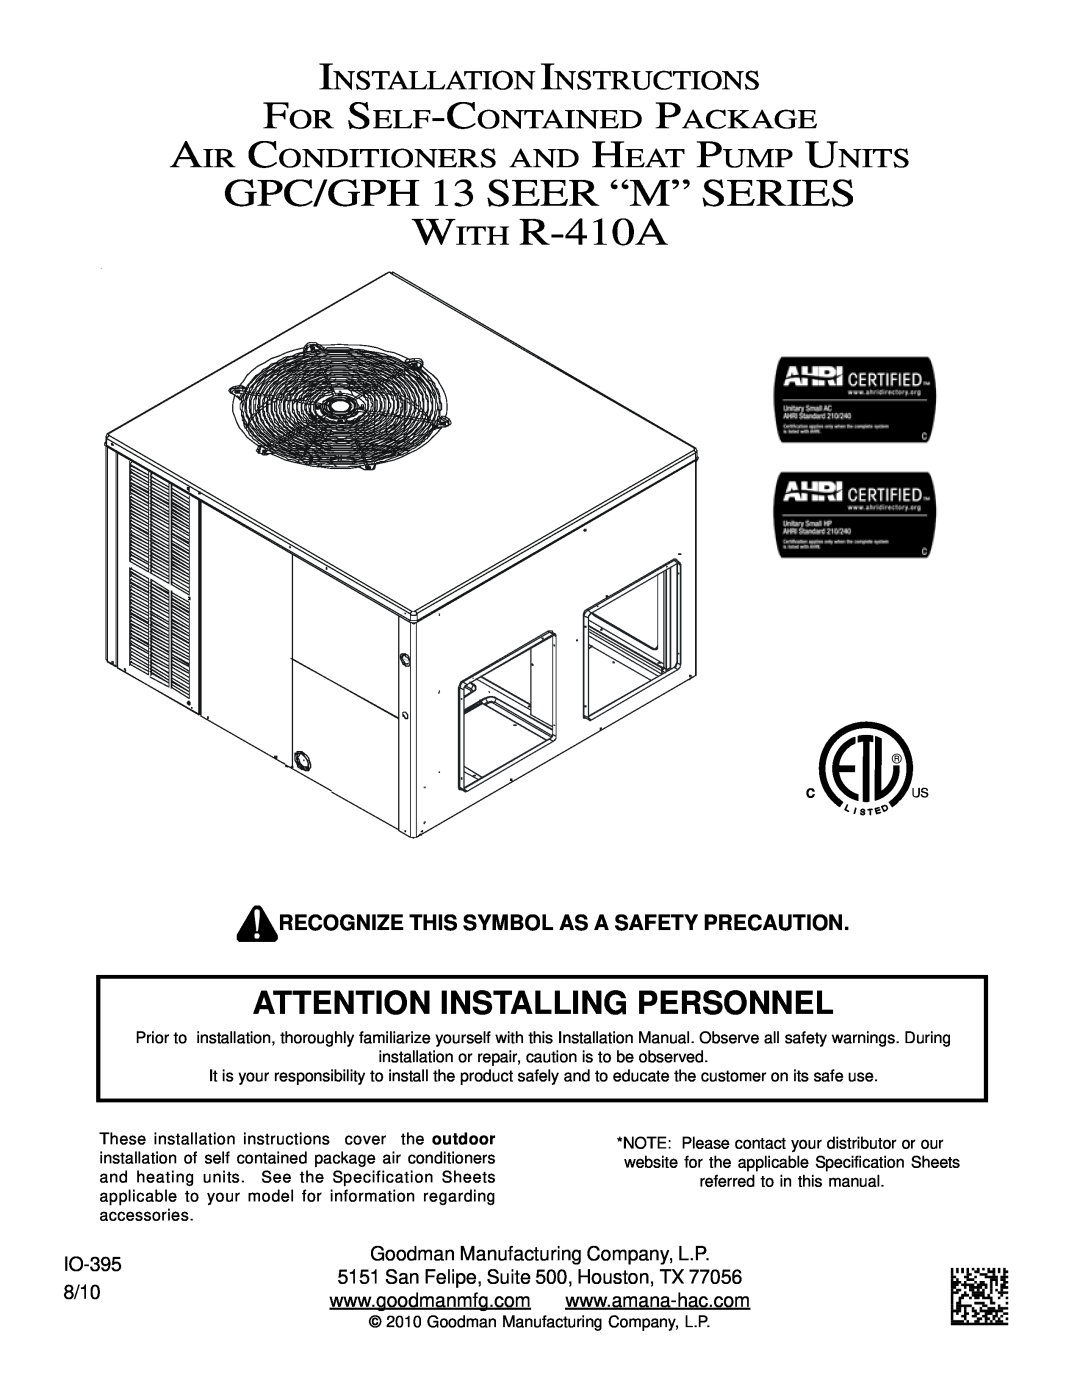 Goodman Mfg IO - 395 specifications Recognize This Symbol As A Safety Precaution, IO-395, 8/10, Installation Instructions 